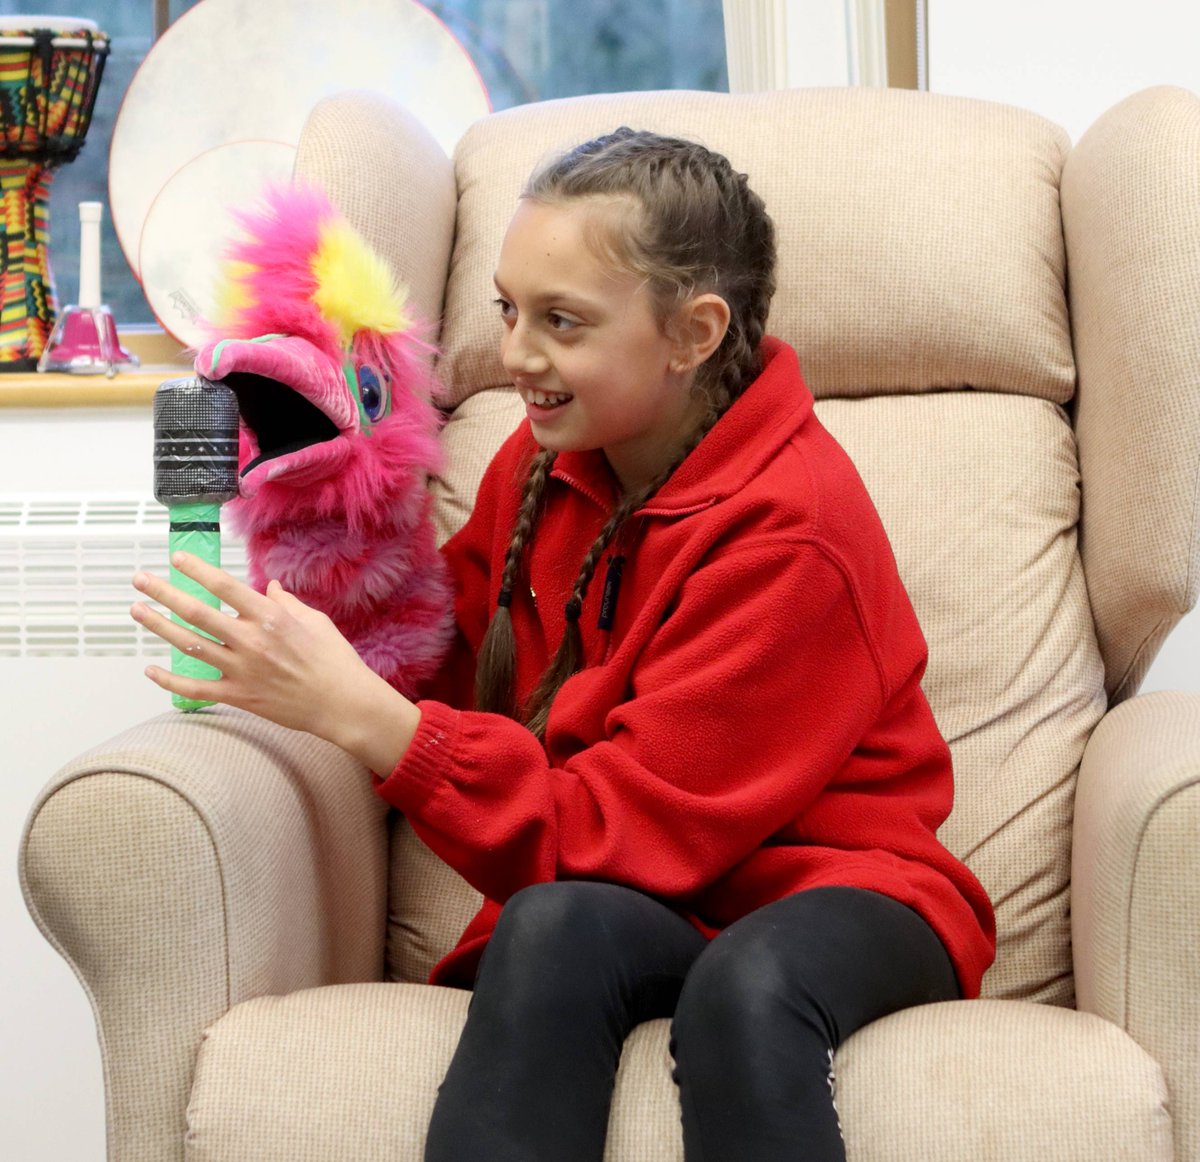 People around the UK use Dying Matters Awareness Week as a moment to encourage all communities to get talking. Toni Evans, who works for Farleigh Hospice’s Yo-Yo Project, shares insights about using role play to help children talk about death: bit.ly/4bgj85u 🎭🤍